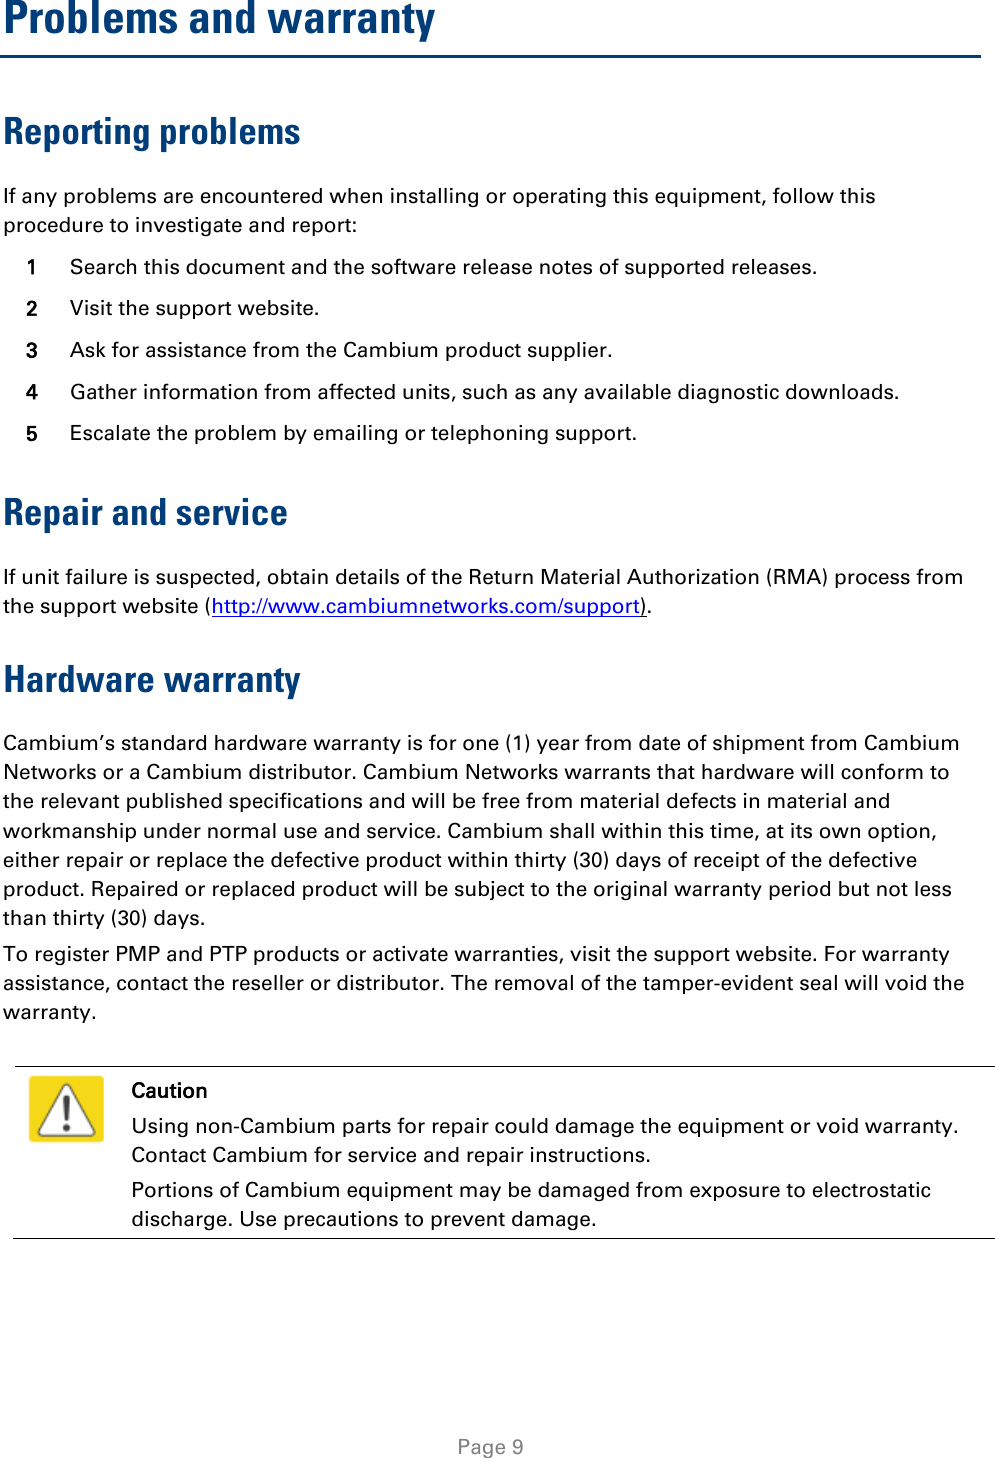   Page 9 Problems and warranty Reporting problems If any problems are encountered when installing or operating this equipment, follow this procedure to investigate and report: 1 Search this document and the software release notes of supported releases. 2 Visit the support website. 3 Ask for assistance from the Cambium product supplier. 4 Gather information from affected units, such as any available diagnostic downloads. 5 Escalate the problem by emailing or telephoning support. Repair and service If unit failure is suspected, obtain details of the Return Material Authorization (RMA) process from the support website (http://www.cambiumnetworks.com/support). Hardware warranty Cambium’s standard hardware warranty is for one (1) year from date of shipment from Cambium Networks or a Cambium distributor. Cambium Networks warrants that hardware will conform to the relevant published specifications and will be free from material defects in material and workmanship under normal use and service. Cambium shall within this time, at its own option, either repair or replace the defective product within thirty (30) days of receipt of the defective product. Repaired or replaced product will be subject to the original warranty period but not less than thirty (30) days. To register PMP and PTP products or activate warranties, visit the support website. For warranty assistance, contact the reseller or distributor. The removal of the tamper-evident seal will void the warranty.   Caution Using non-Cambium parts for repair could damage the equipment or void warranty. Contact Cambium for service and repair instructions. Portions of Cambium equipment may be damaged from exposure to electrostatic discharge. Use precautions to prevent damage.  